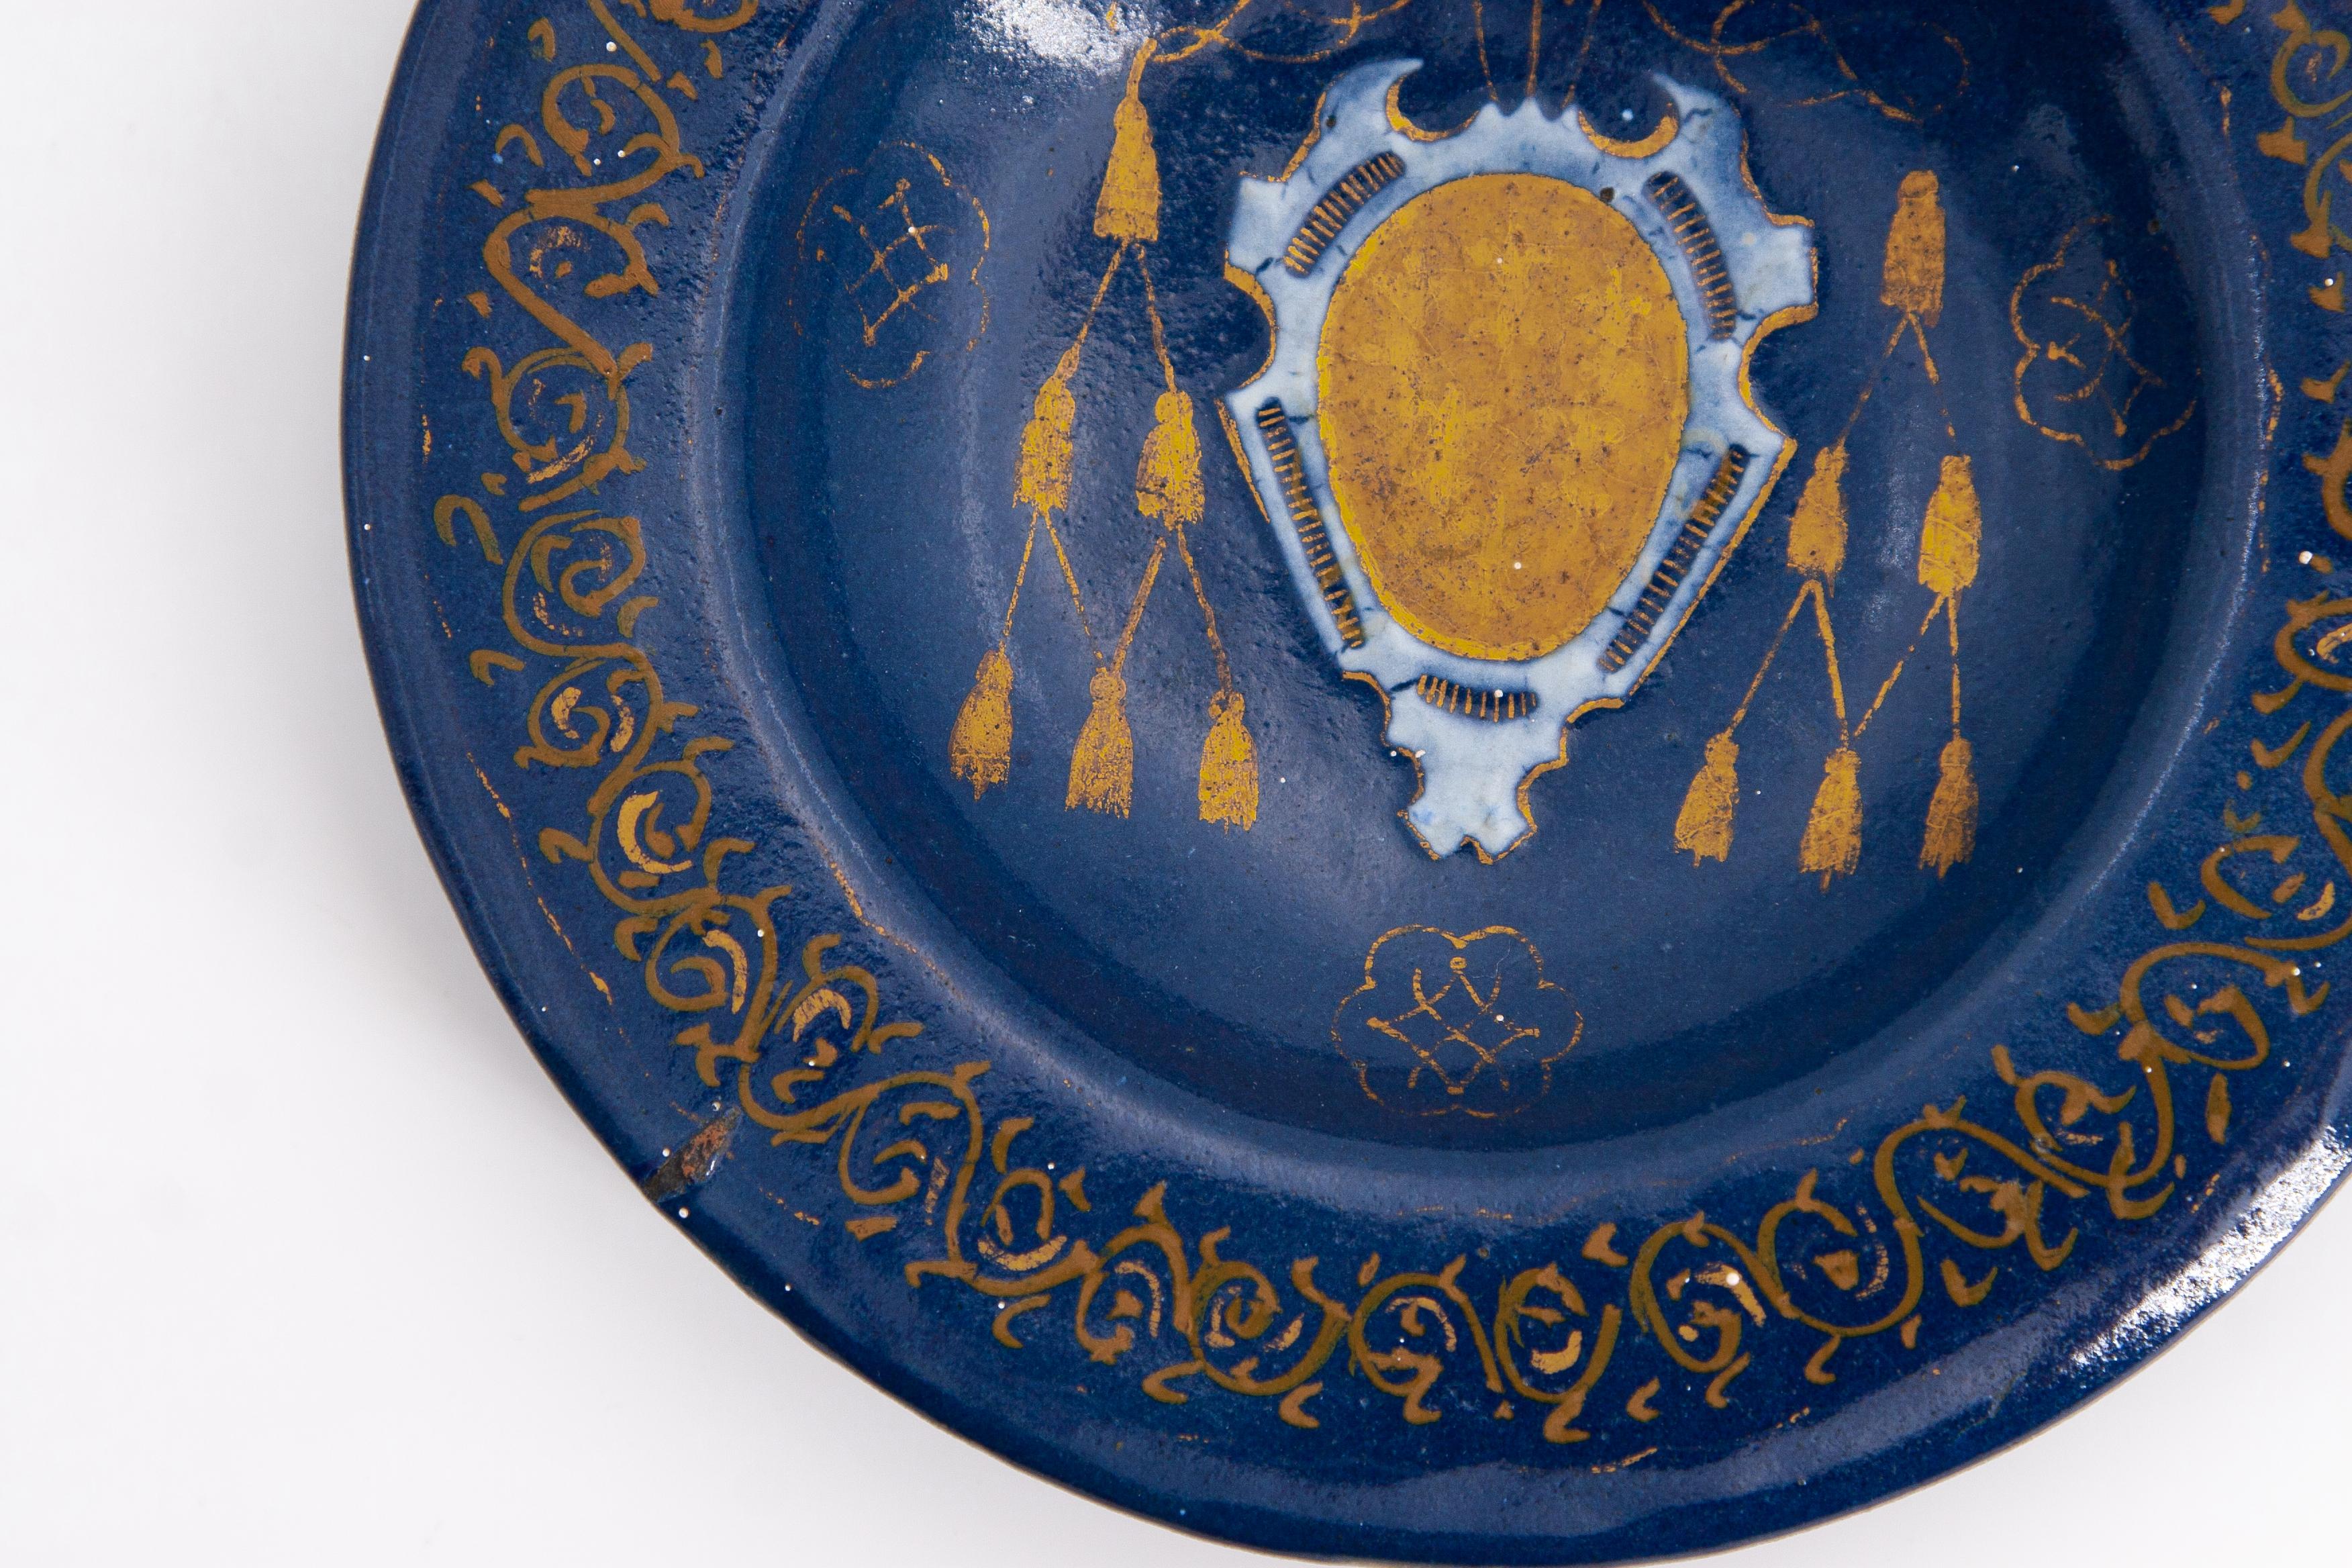 maiolica meaning